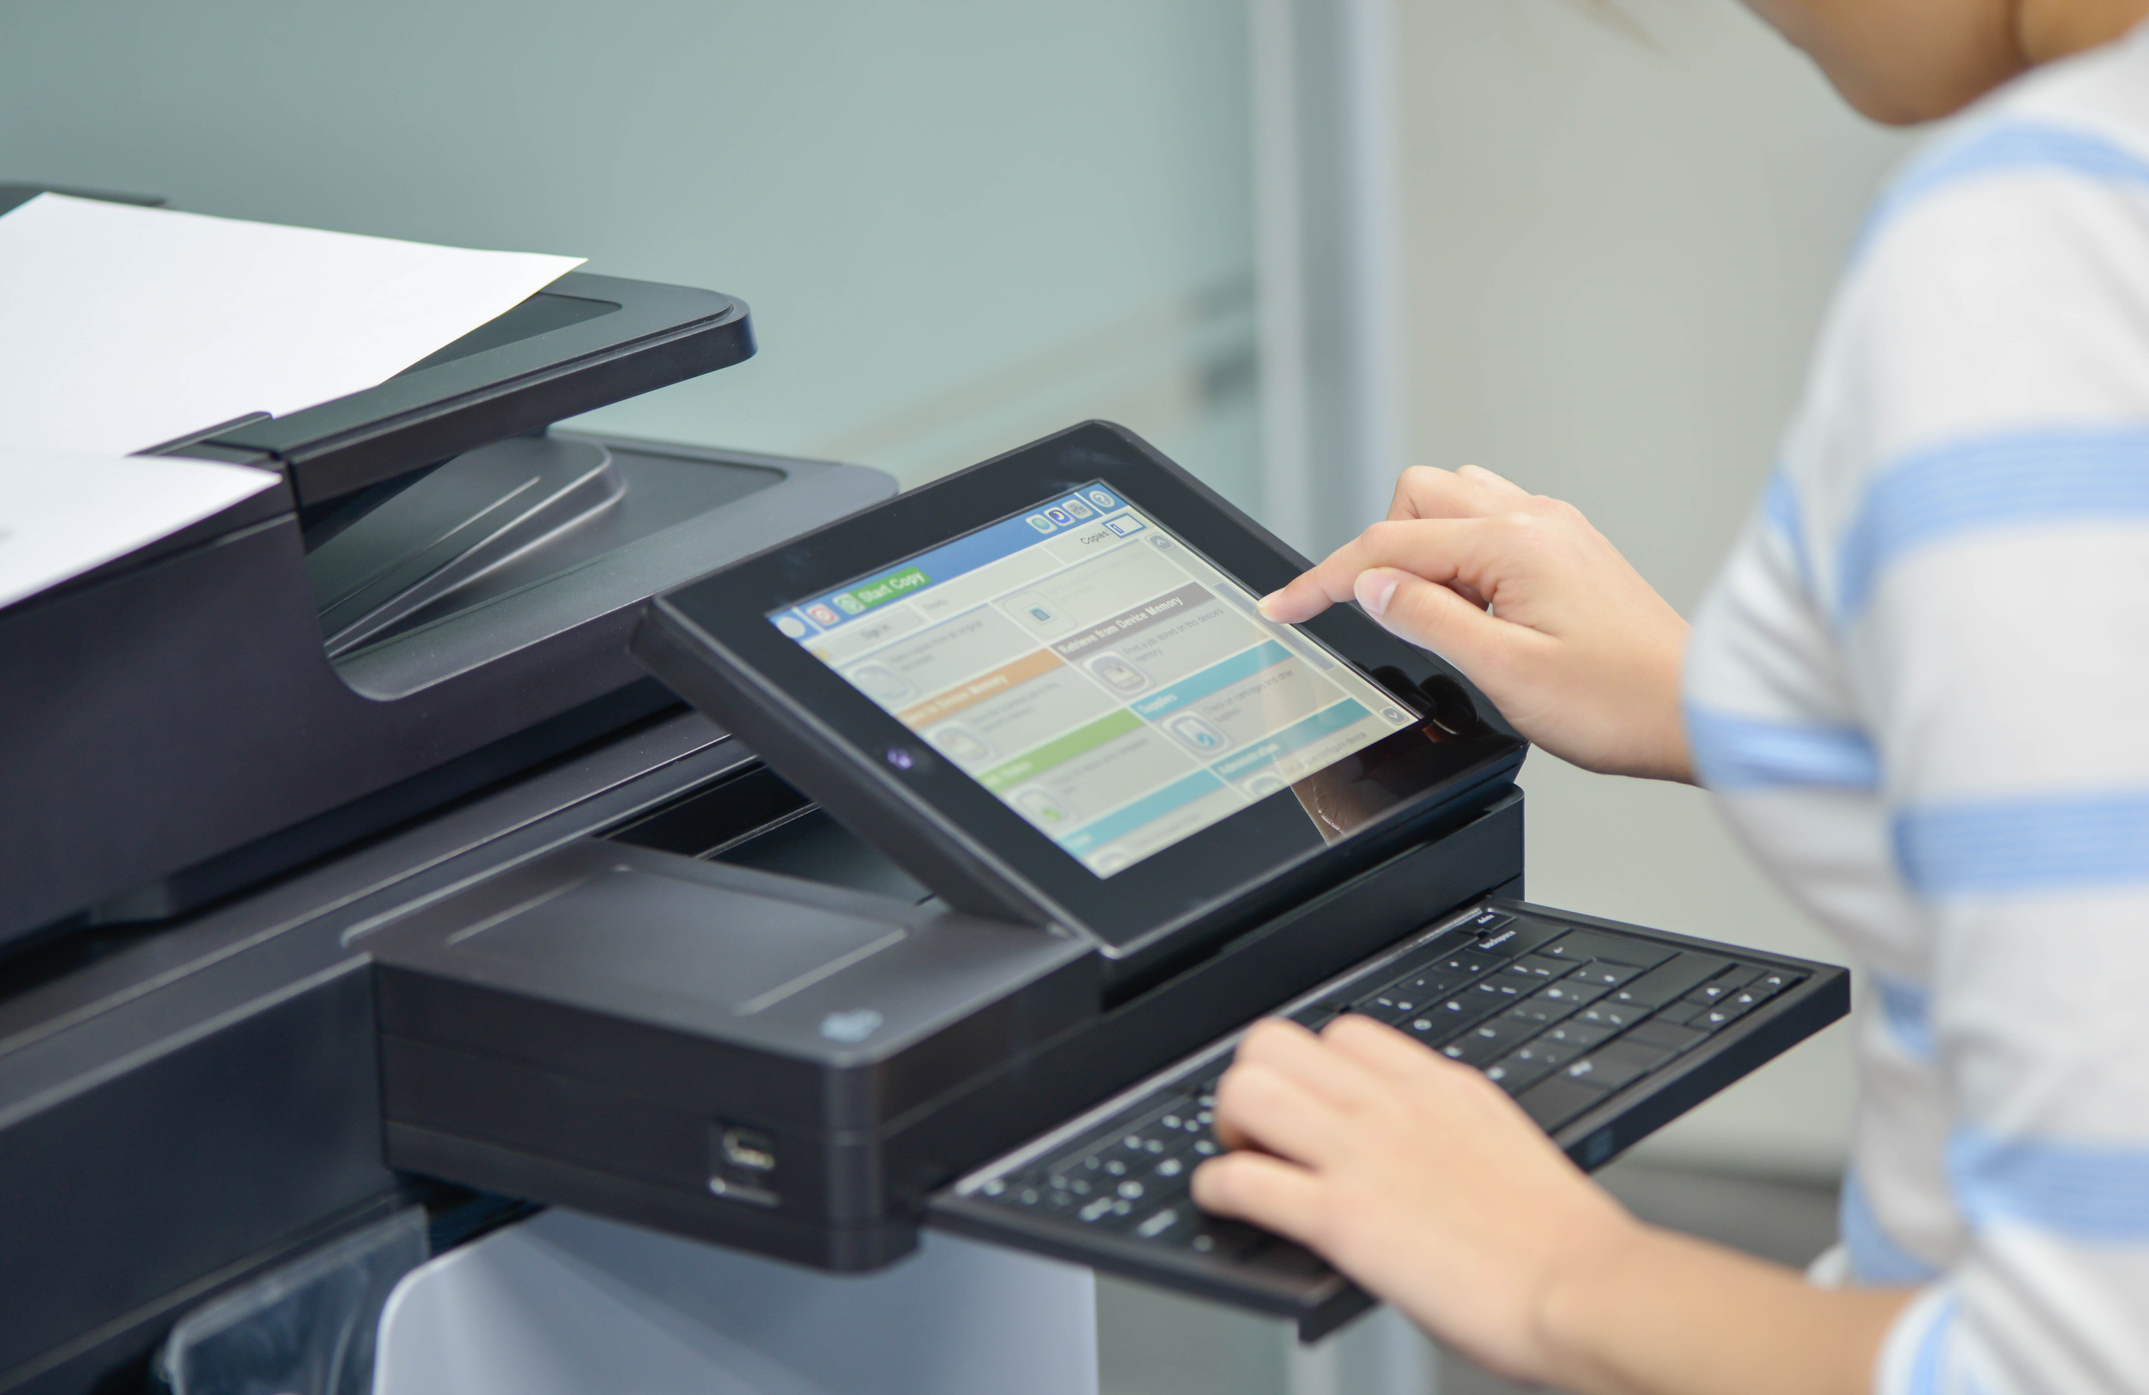 You are currently viewing Ensure your Copier Data is Properly Safe and Secure